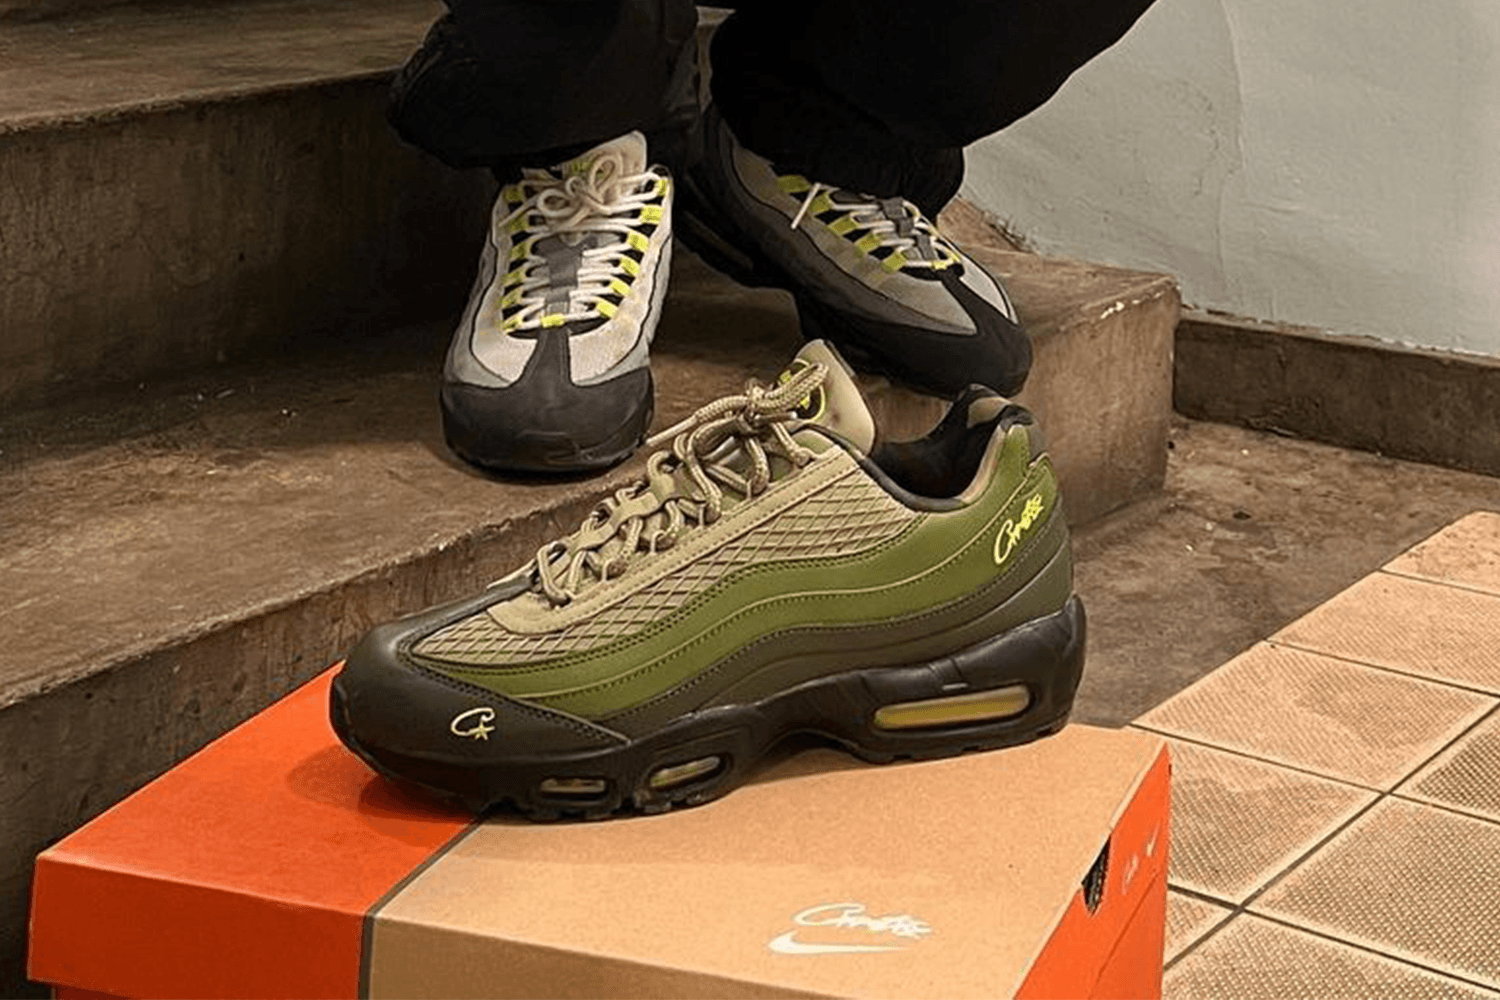 Nike x Corteiz collaborate on the Air Max 95